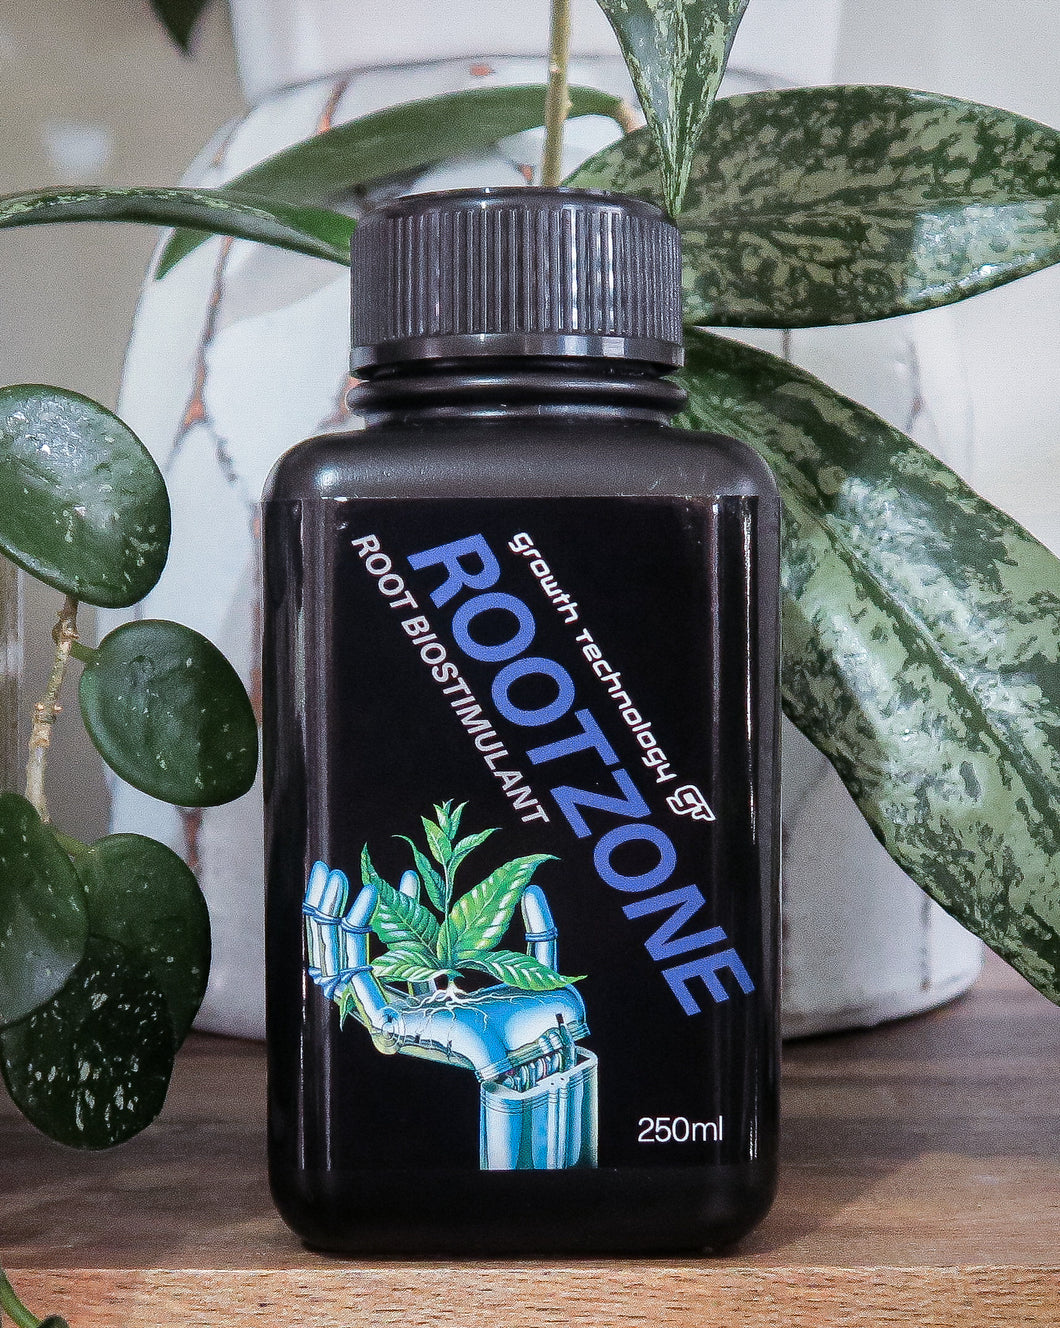 Rootzone 250ml by Growth Technology